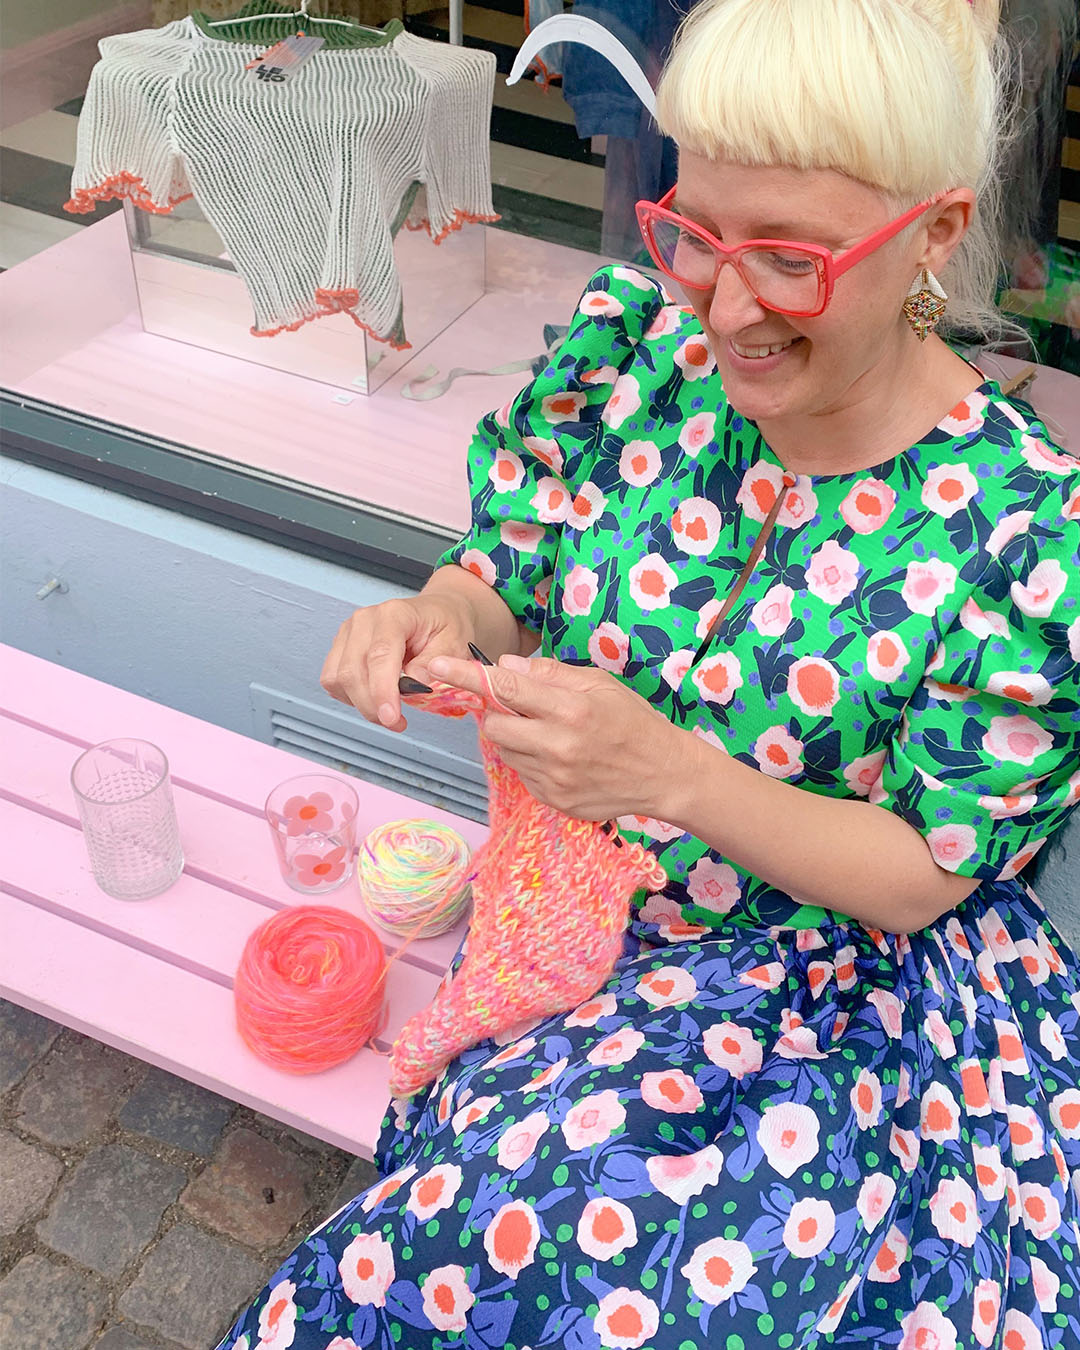 Sofie in a floral dress and bright red glasses sits outside, knitting with neon yarn, in front of a vibrant display window, her contented smile reflecting her passion for craft.